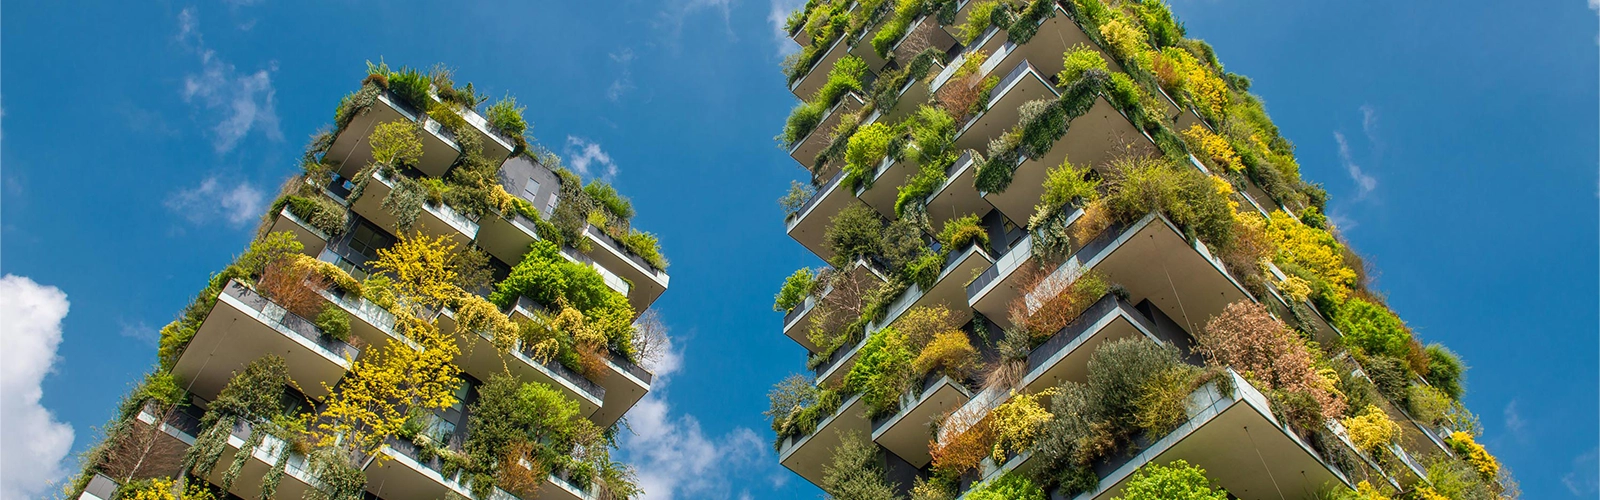 Sustainable Buildings – A Green Leap Forward